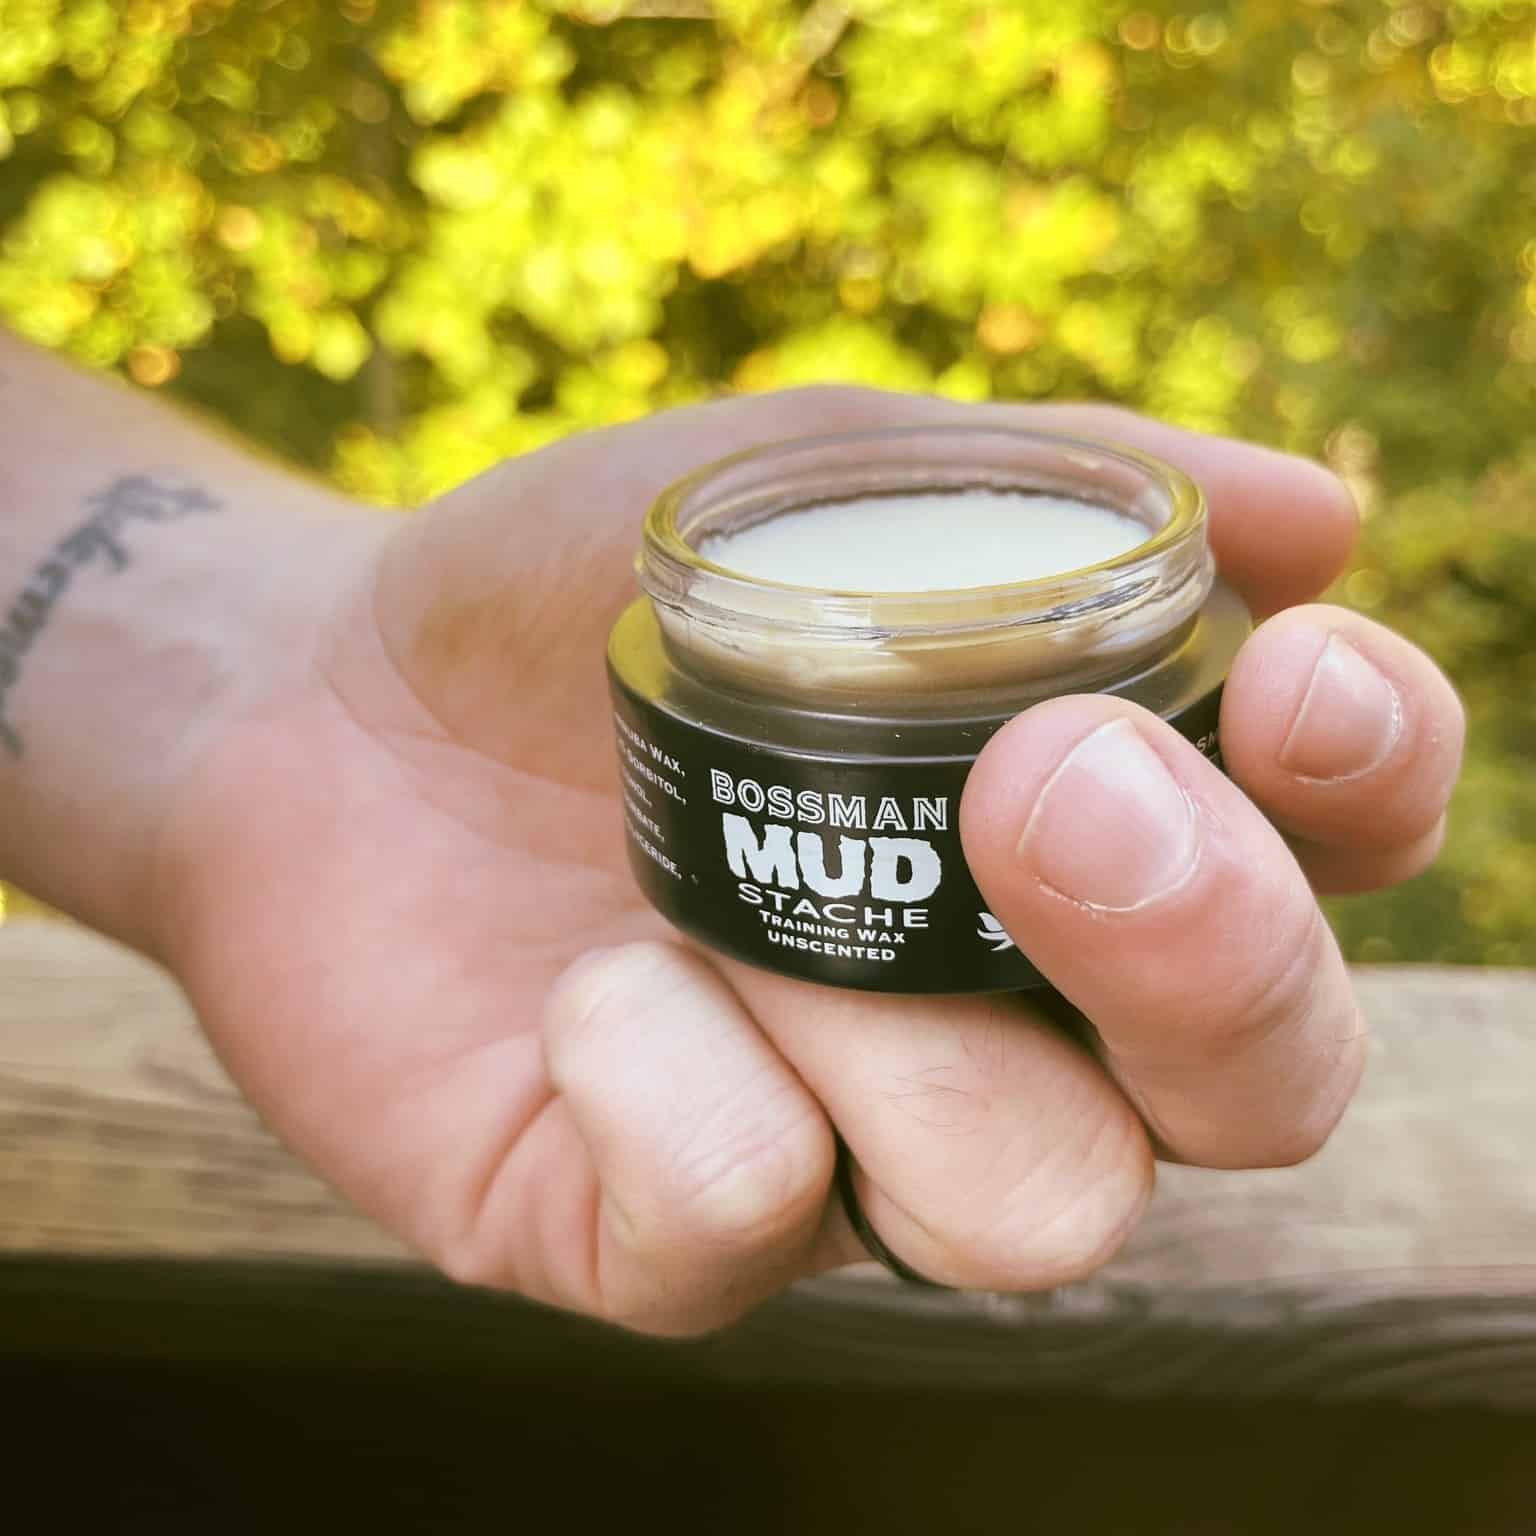 holding the mud stache training wax by bossman